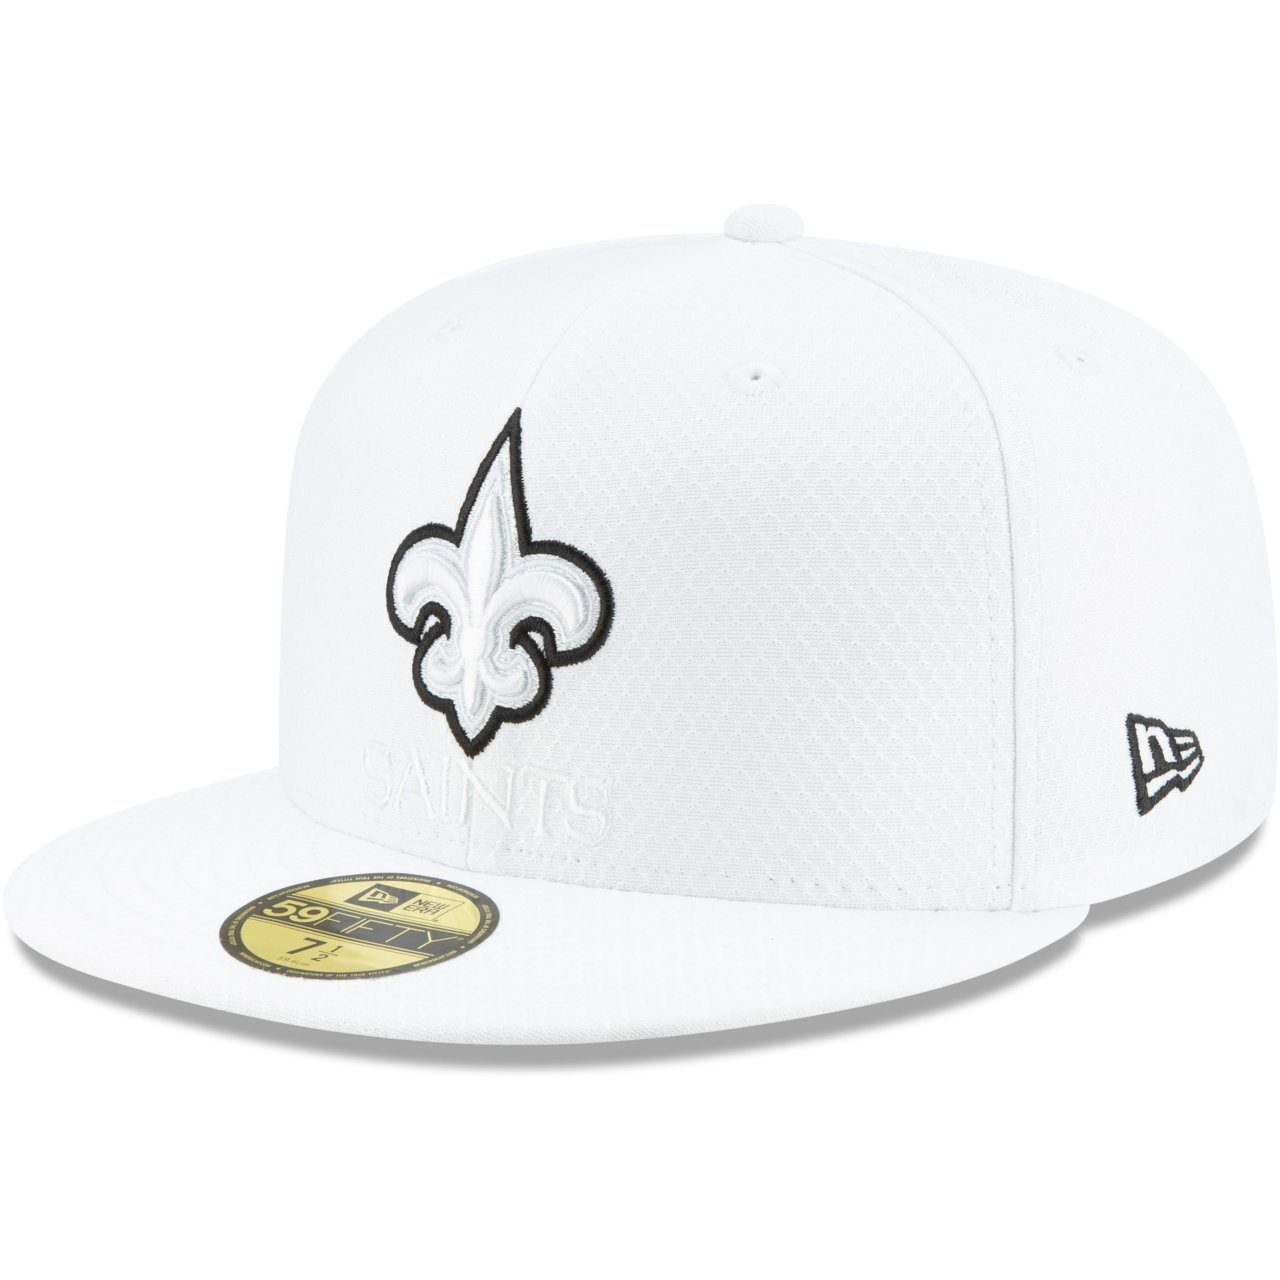 New Era NFL Fitted PLATINUM Saints Orleans Sideline New Cap 59Fifty